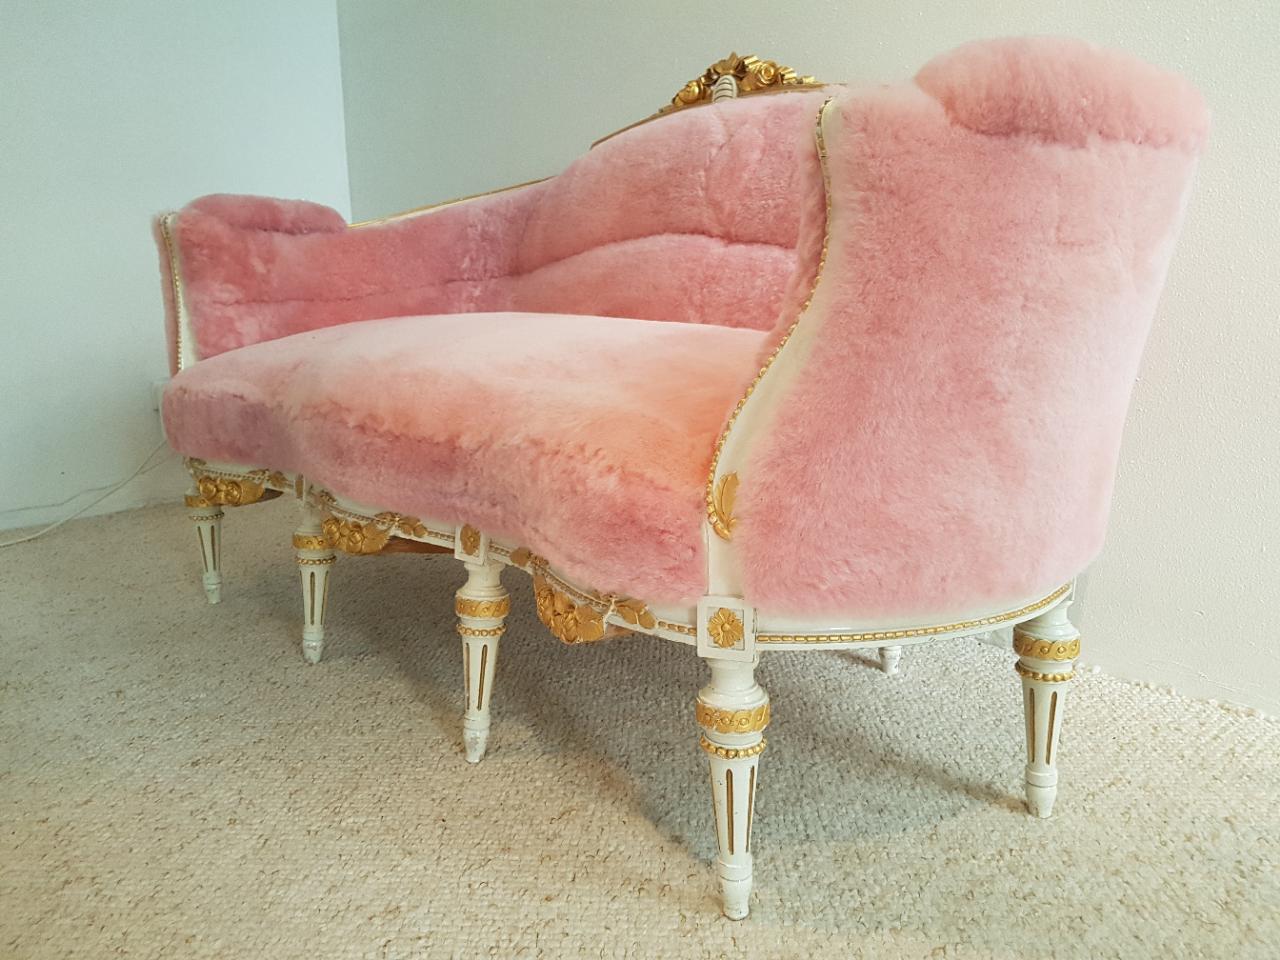 We work with hides and furs to create luxurious collections.
This sheepskin Gustavian style sof, circa 1910 - is upholstered in pink shearling by specialist French craftsmen combining traditional and modern techniques.
This sofa is an incredible